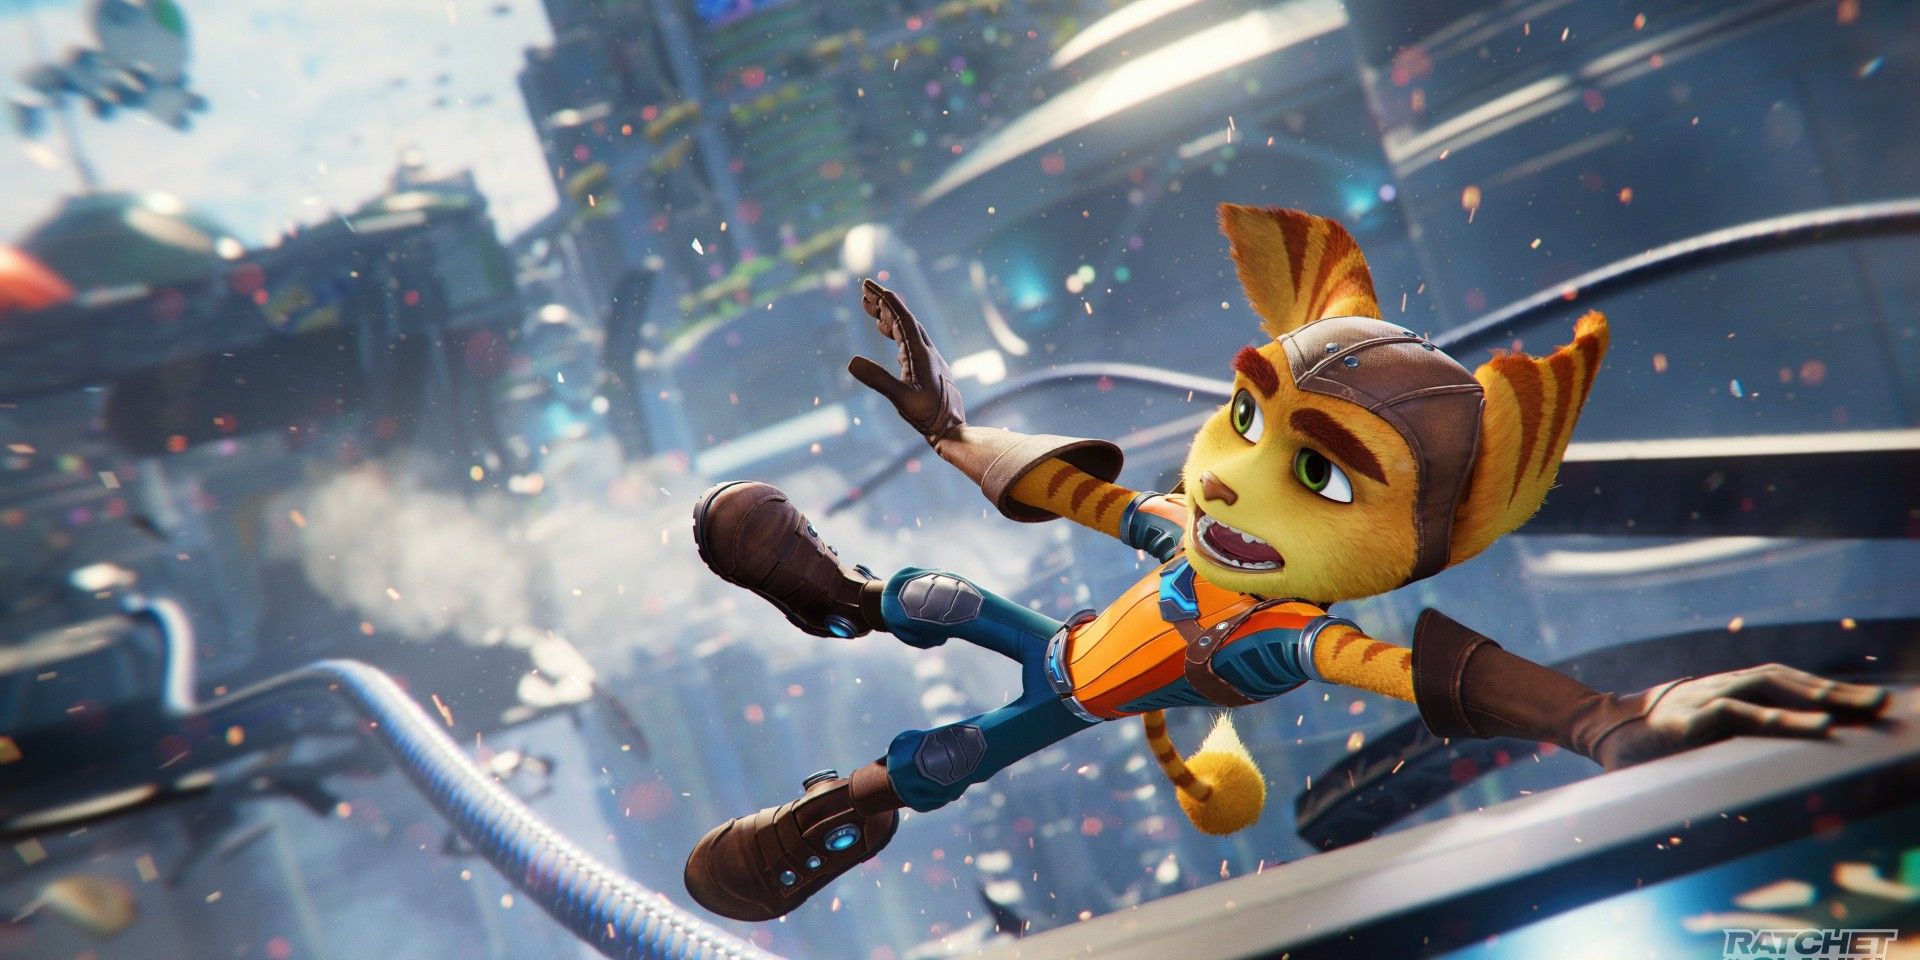 Ratchet holding onto a vehicle in Ratchet and Clank: Rift Apart.